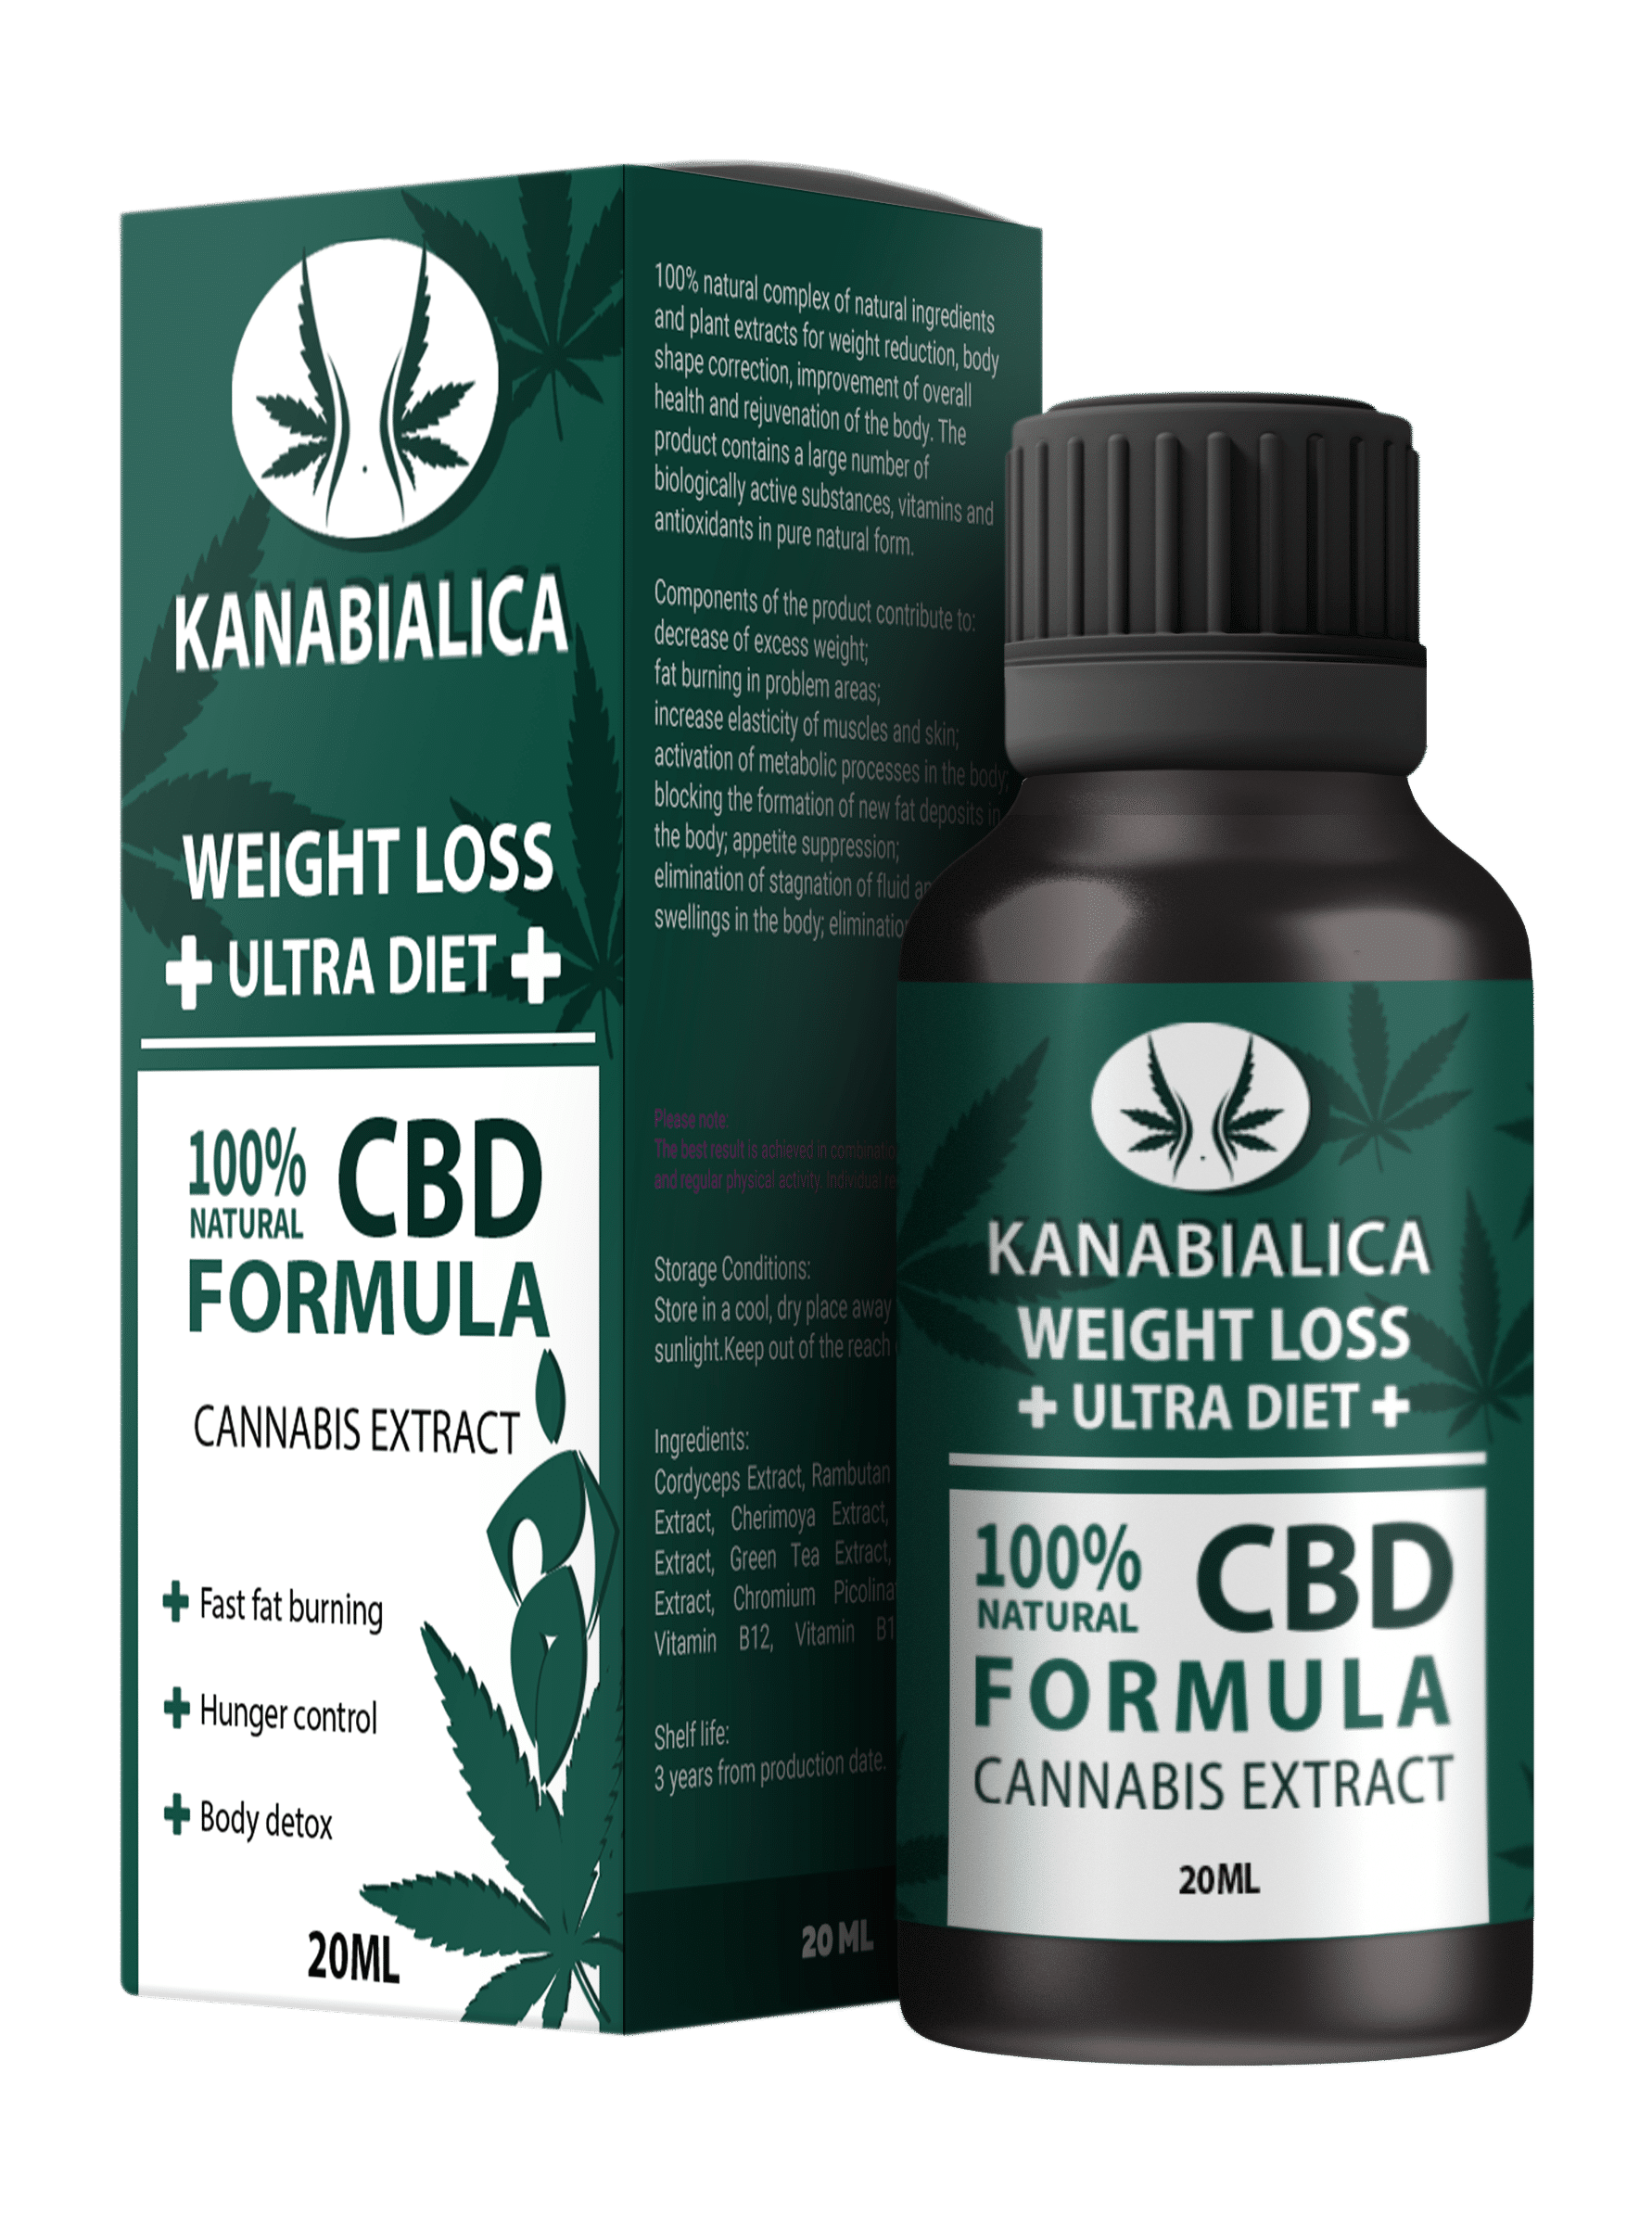 Kanabialica Product Overview. What Is It?